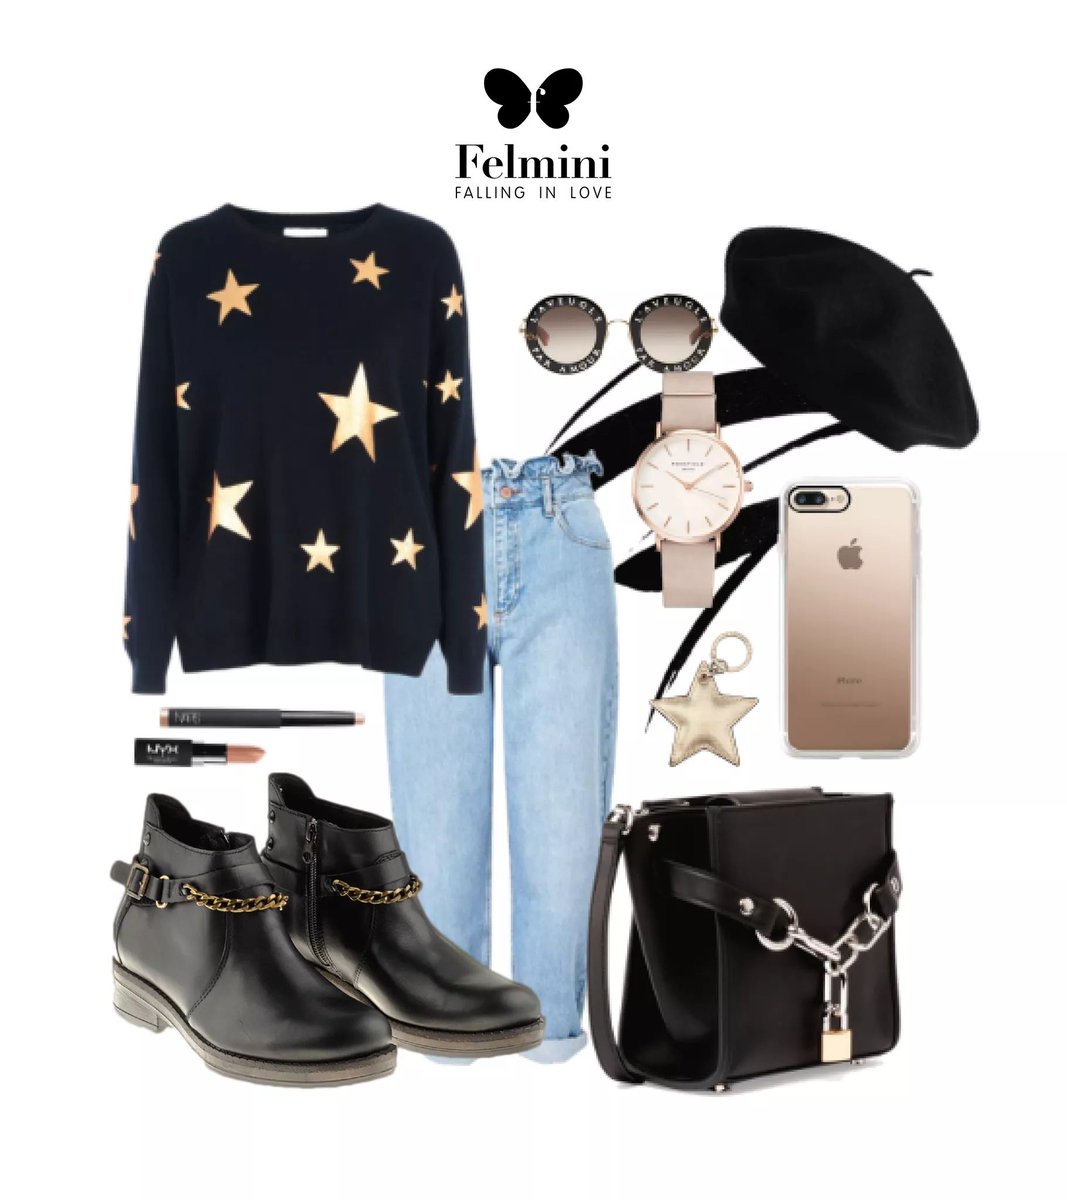 Look Inspiration for your week! 😉
Felmini Collection 👁

#felminifallwinter201718 #felmini #boots #felminiboots #casual  #fall #fw1718 #winter #fallinginlove #photo #takeaphoto #lookinspiration #outfit